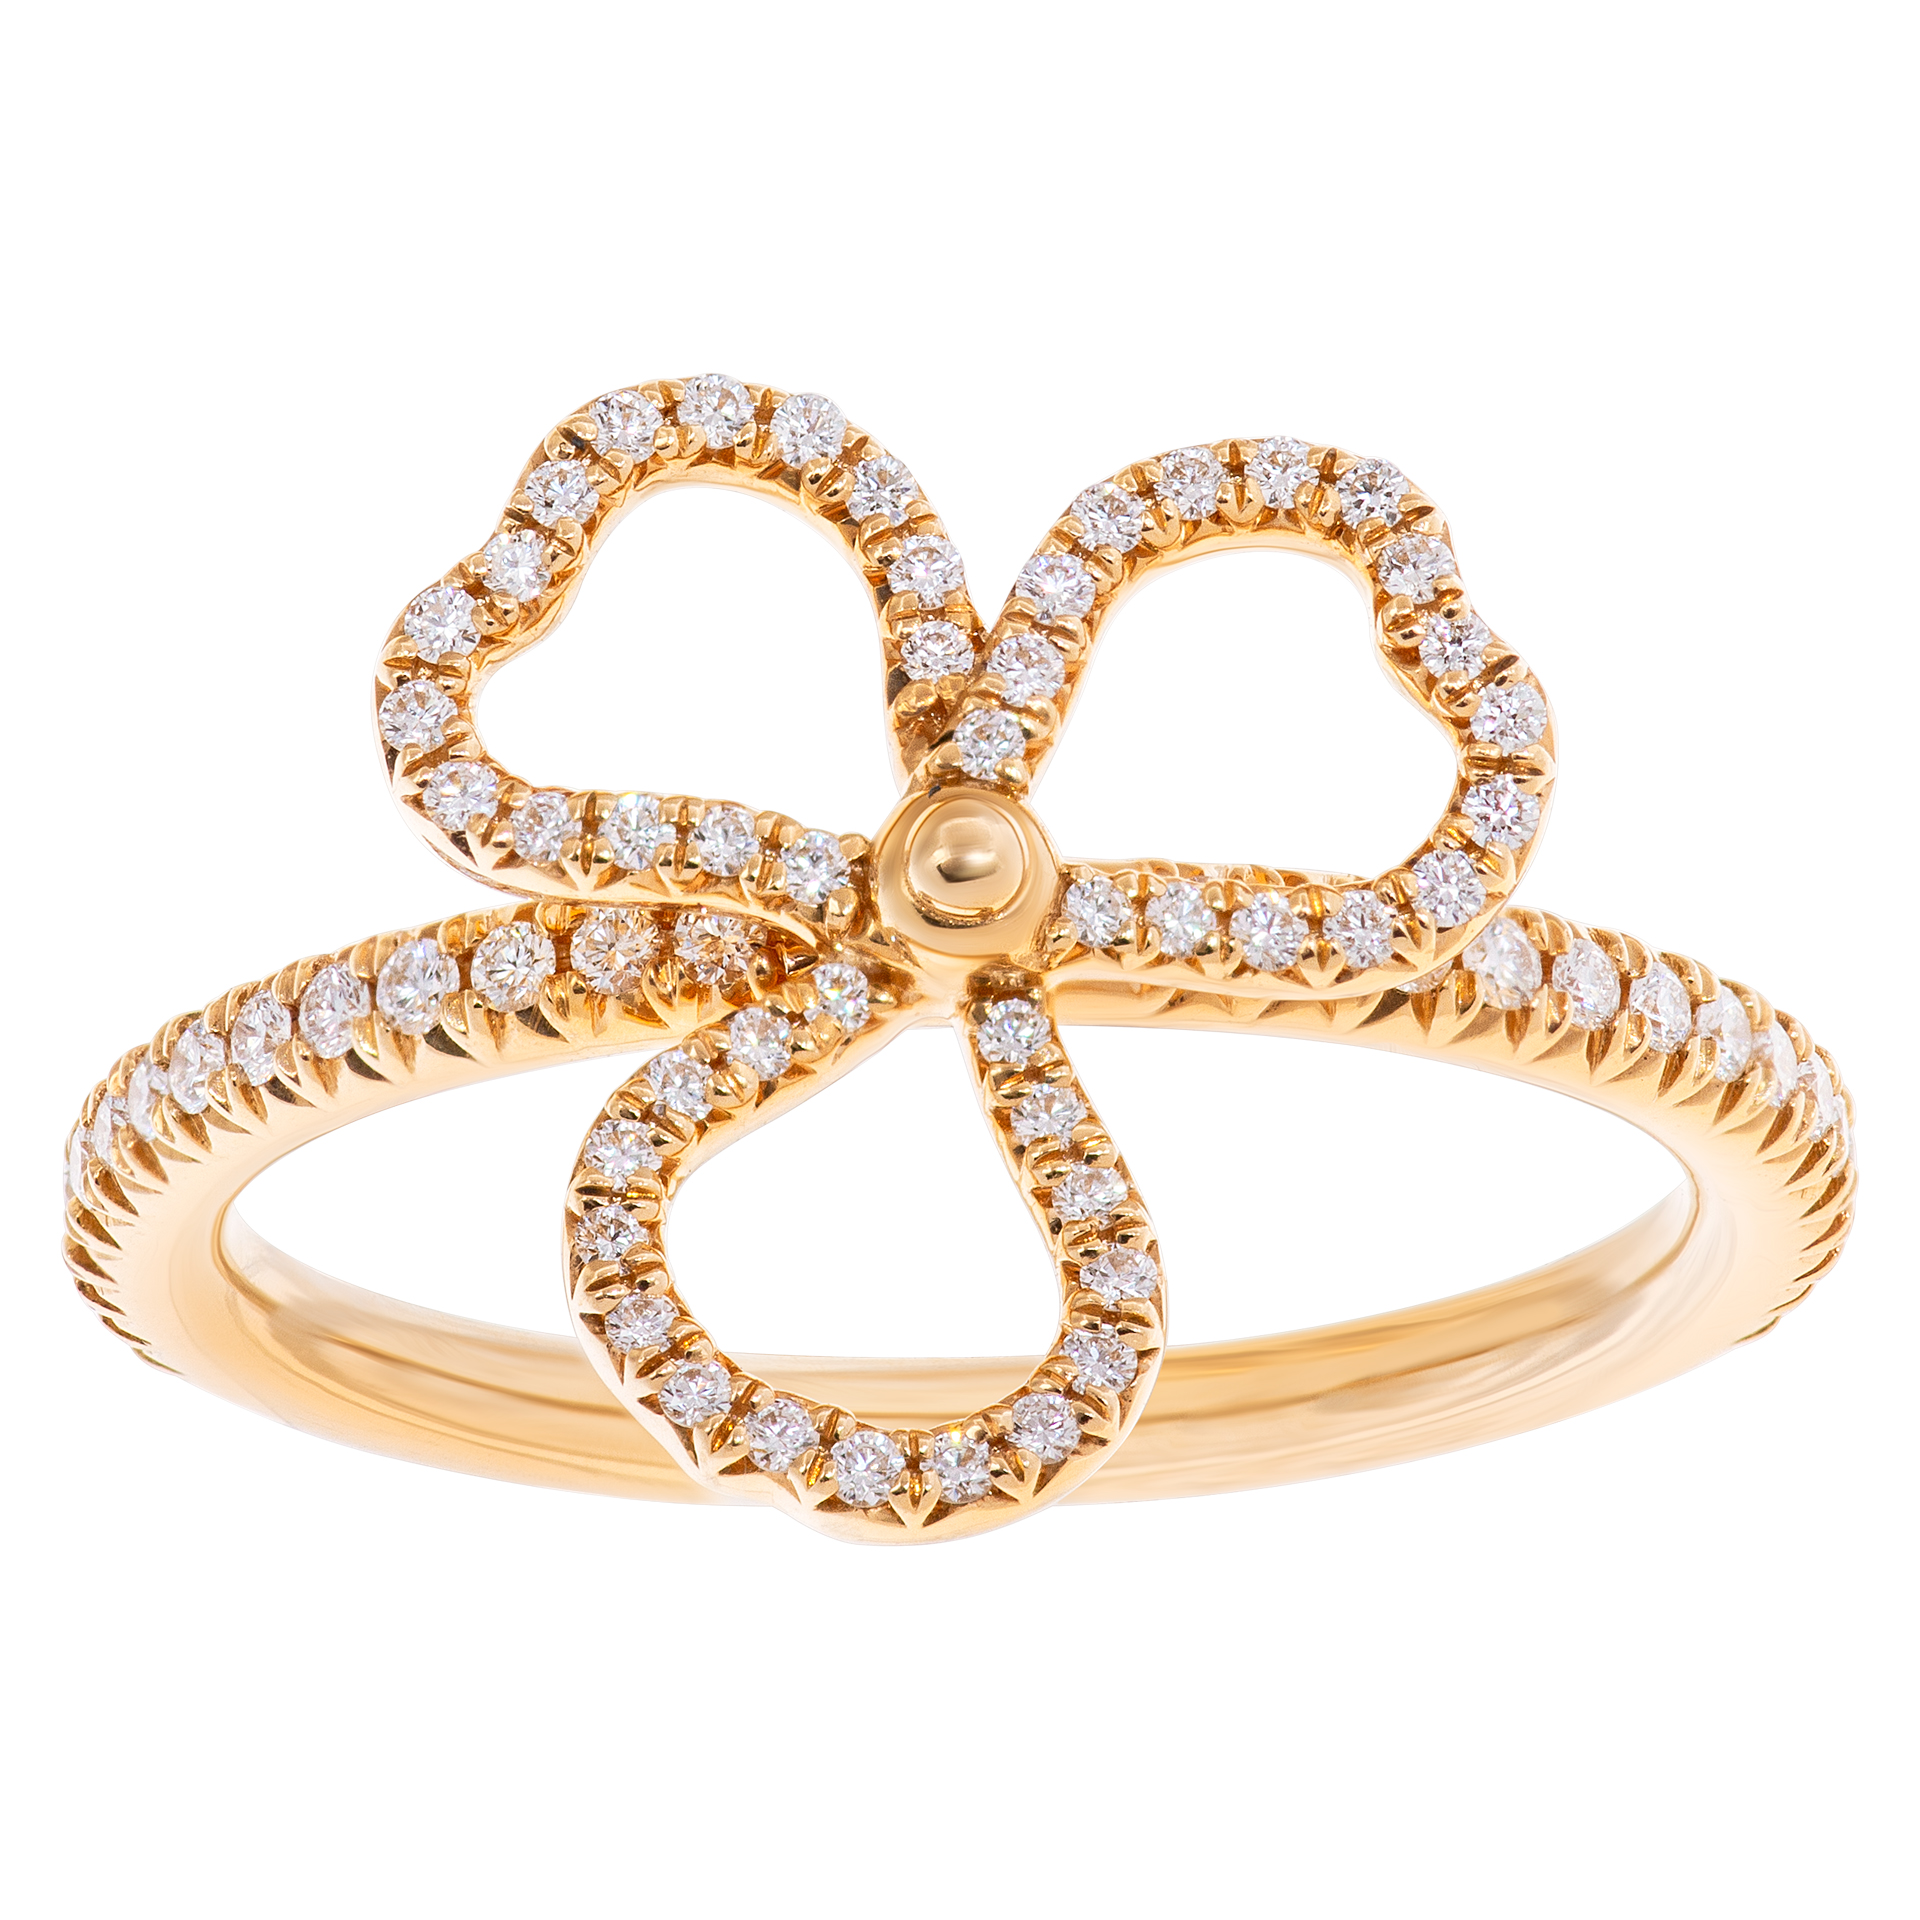 Tiffany & Co. "Paper Flowers" collection, open 3 leaves clover ring with 0.14 carat in diamonds, set in 18k rose gold image 1